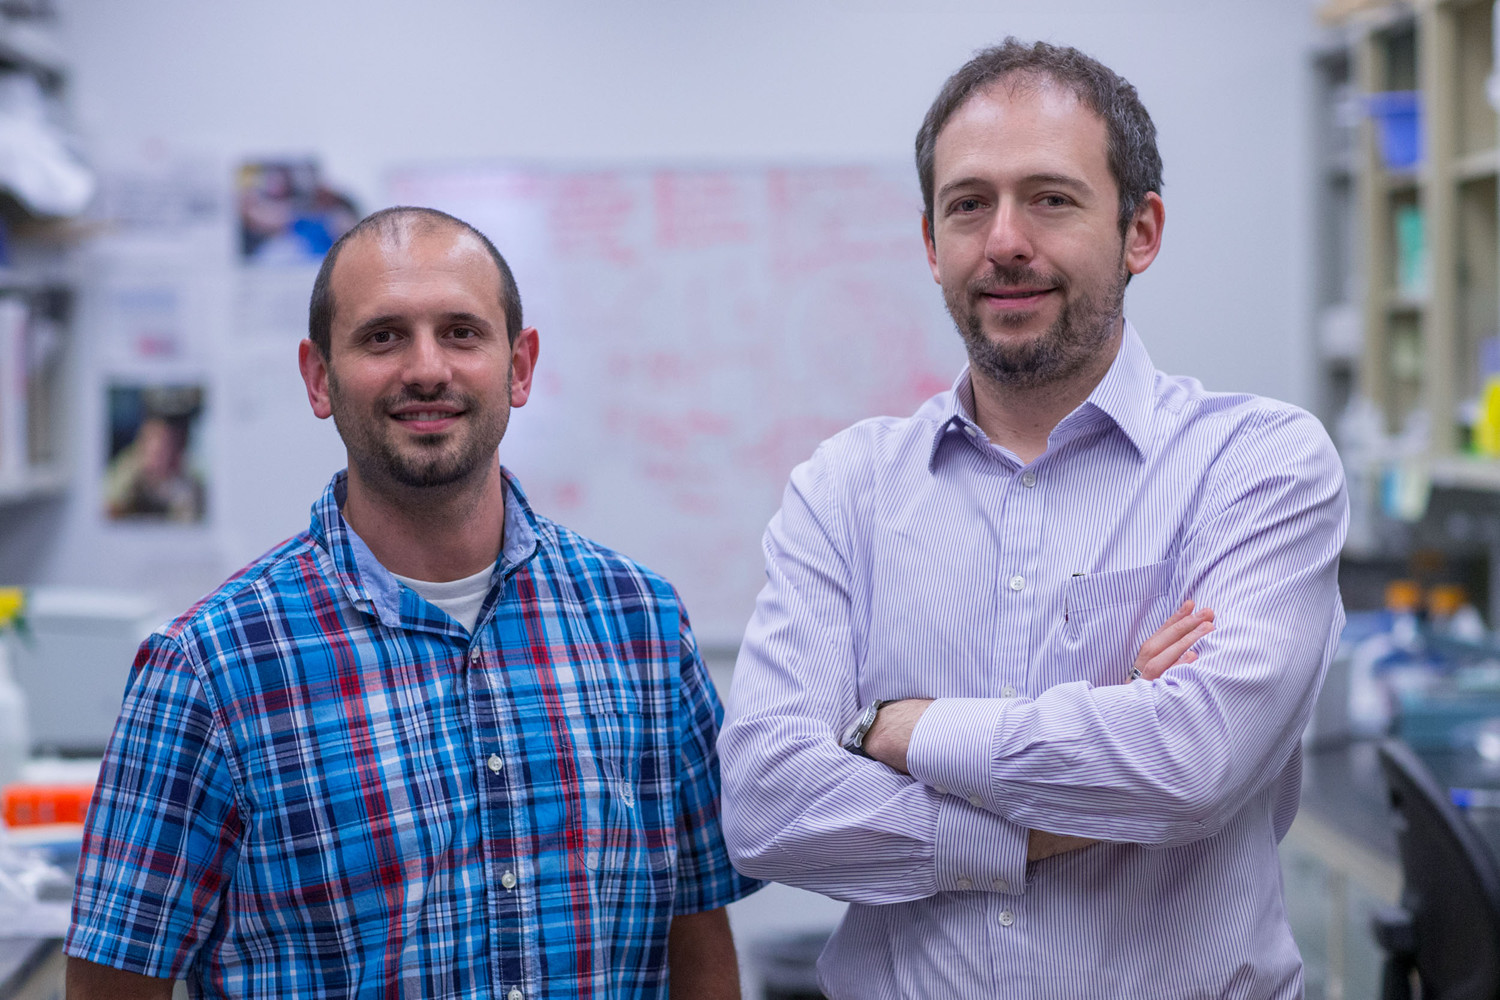 Postdoctoral researcher Anthony J. Filiano, left, and Jonathan Kipnis, chairman of UVA’s Department of Neuroscience.